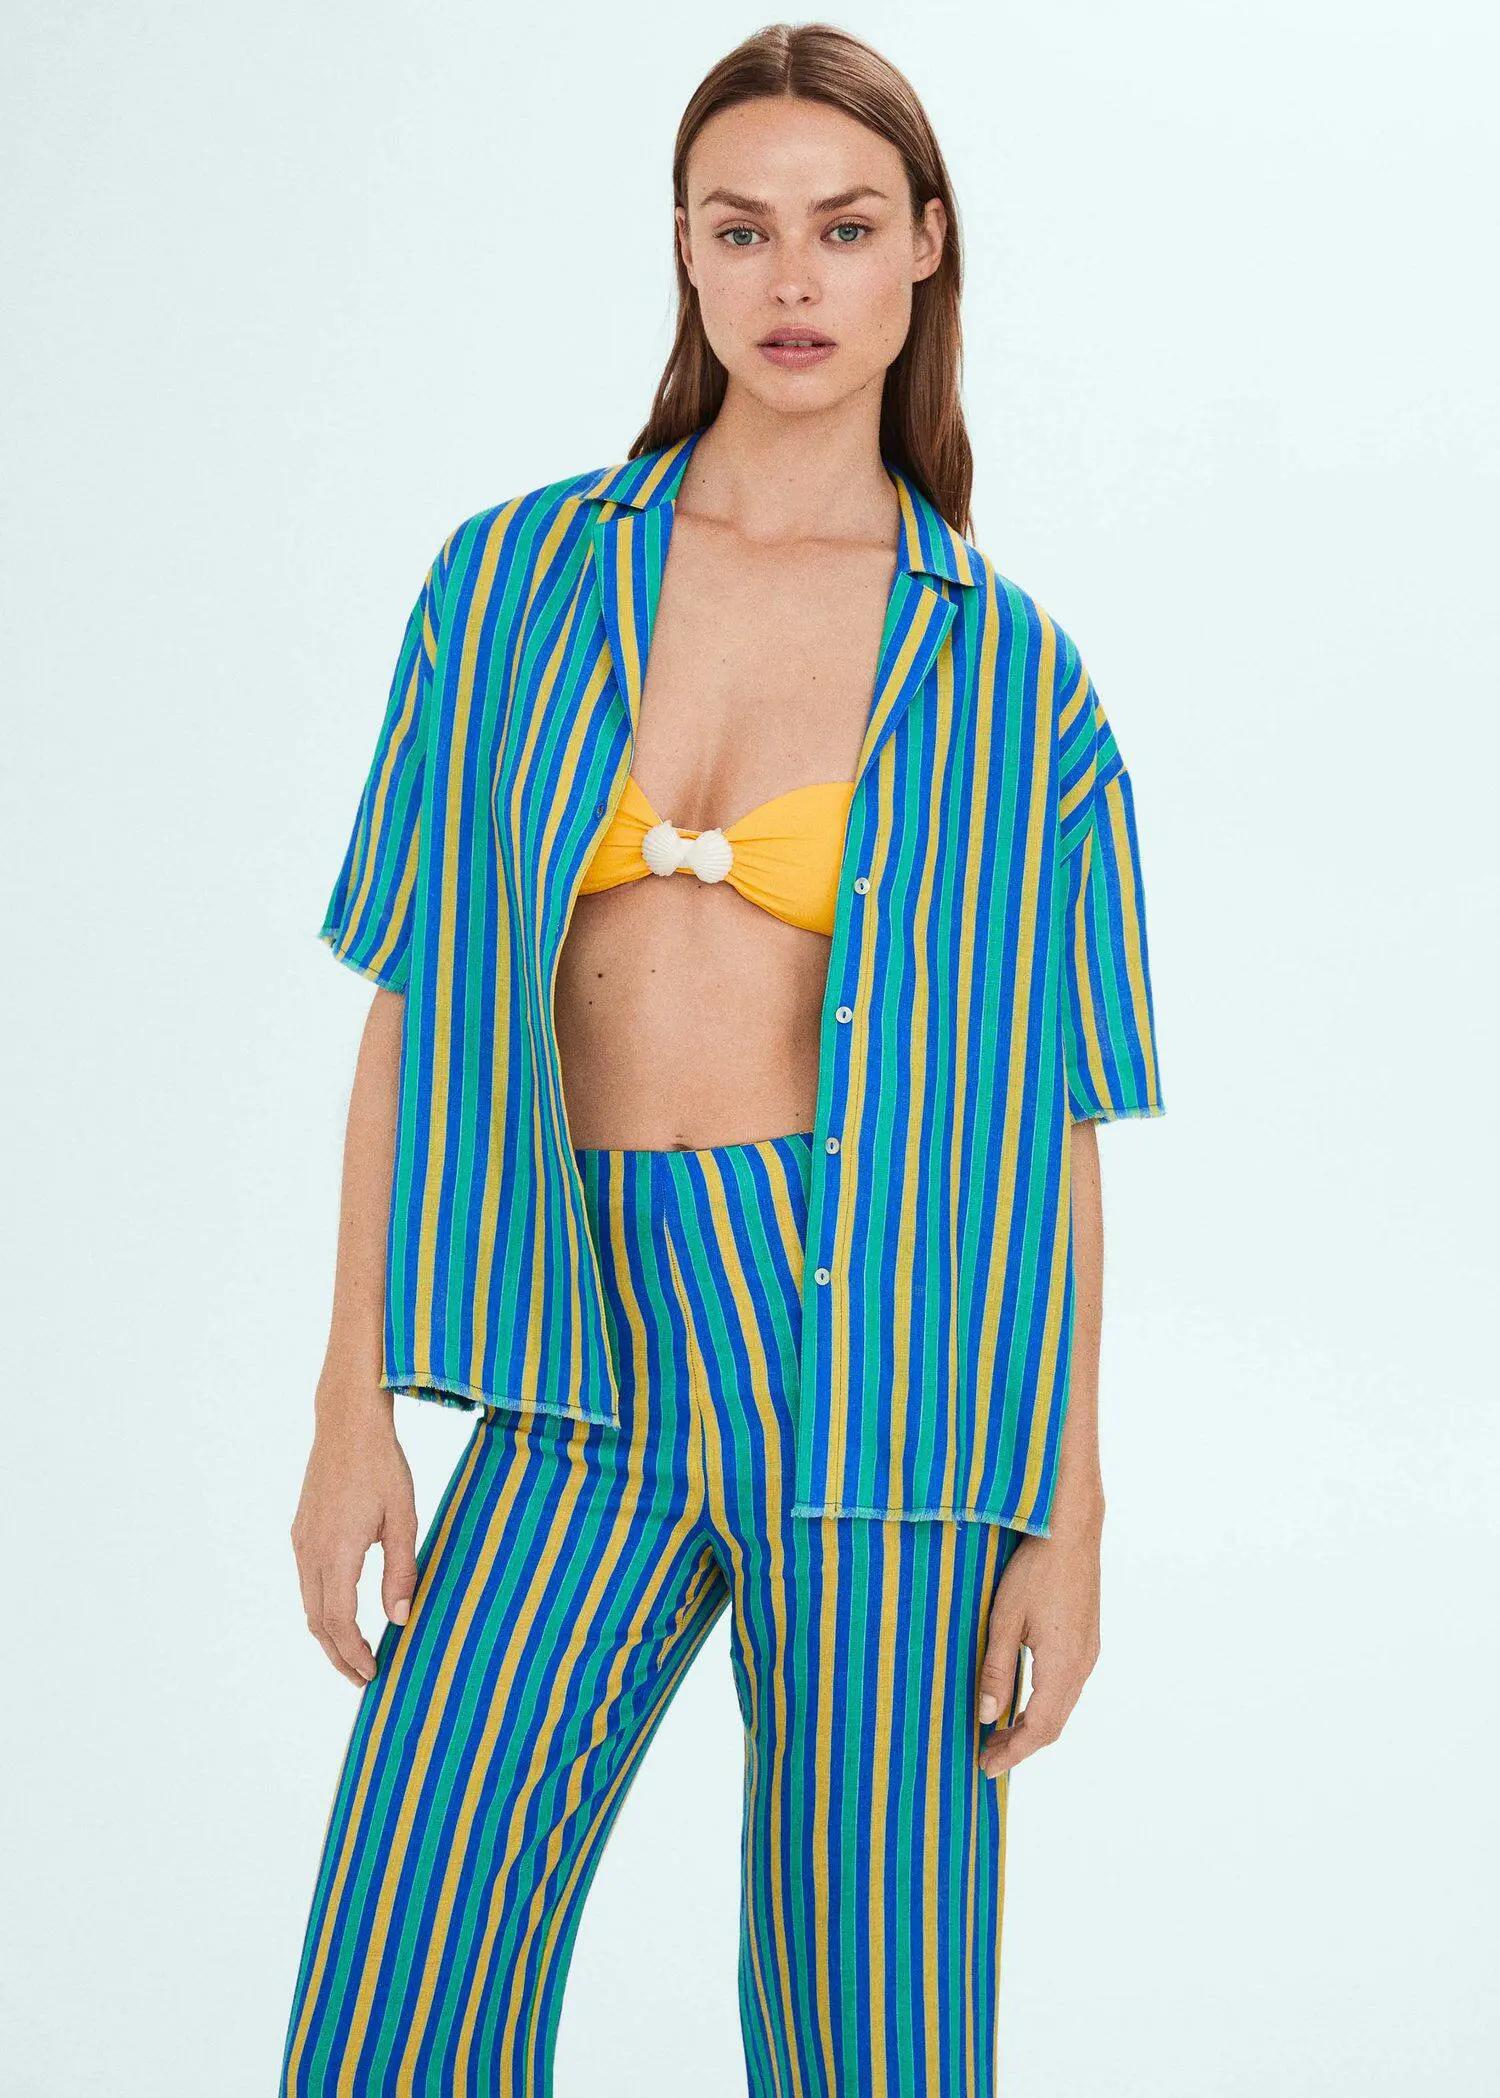 Mango Multi-colored striped linen shirt. a woman in a blue and yellow striped outfit. 